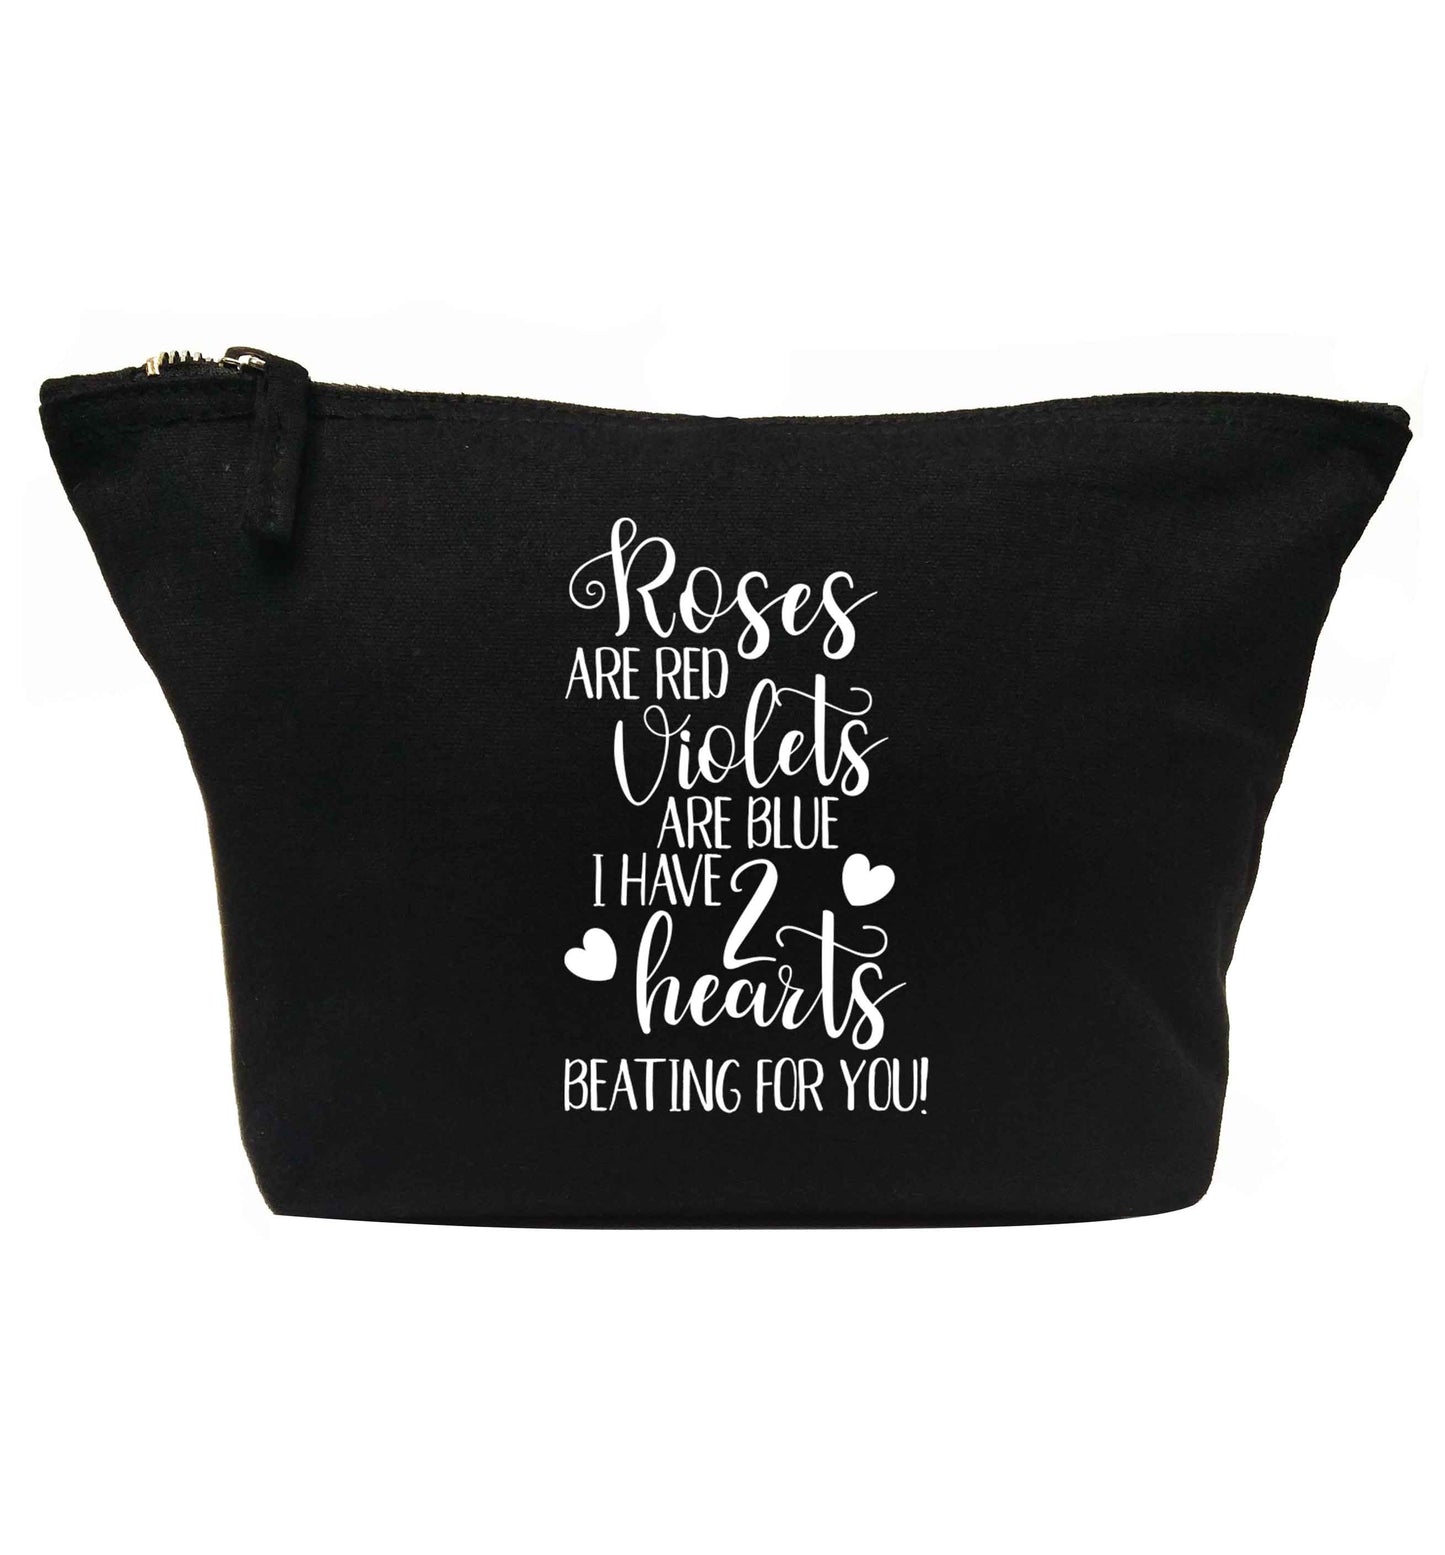 Roses are red violets are blue I have two hearts beating for you | makeup / wash bag